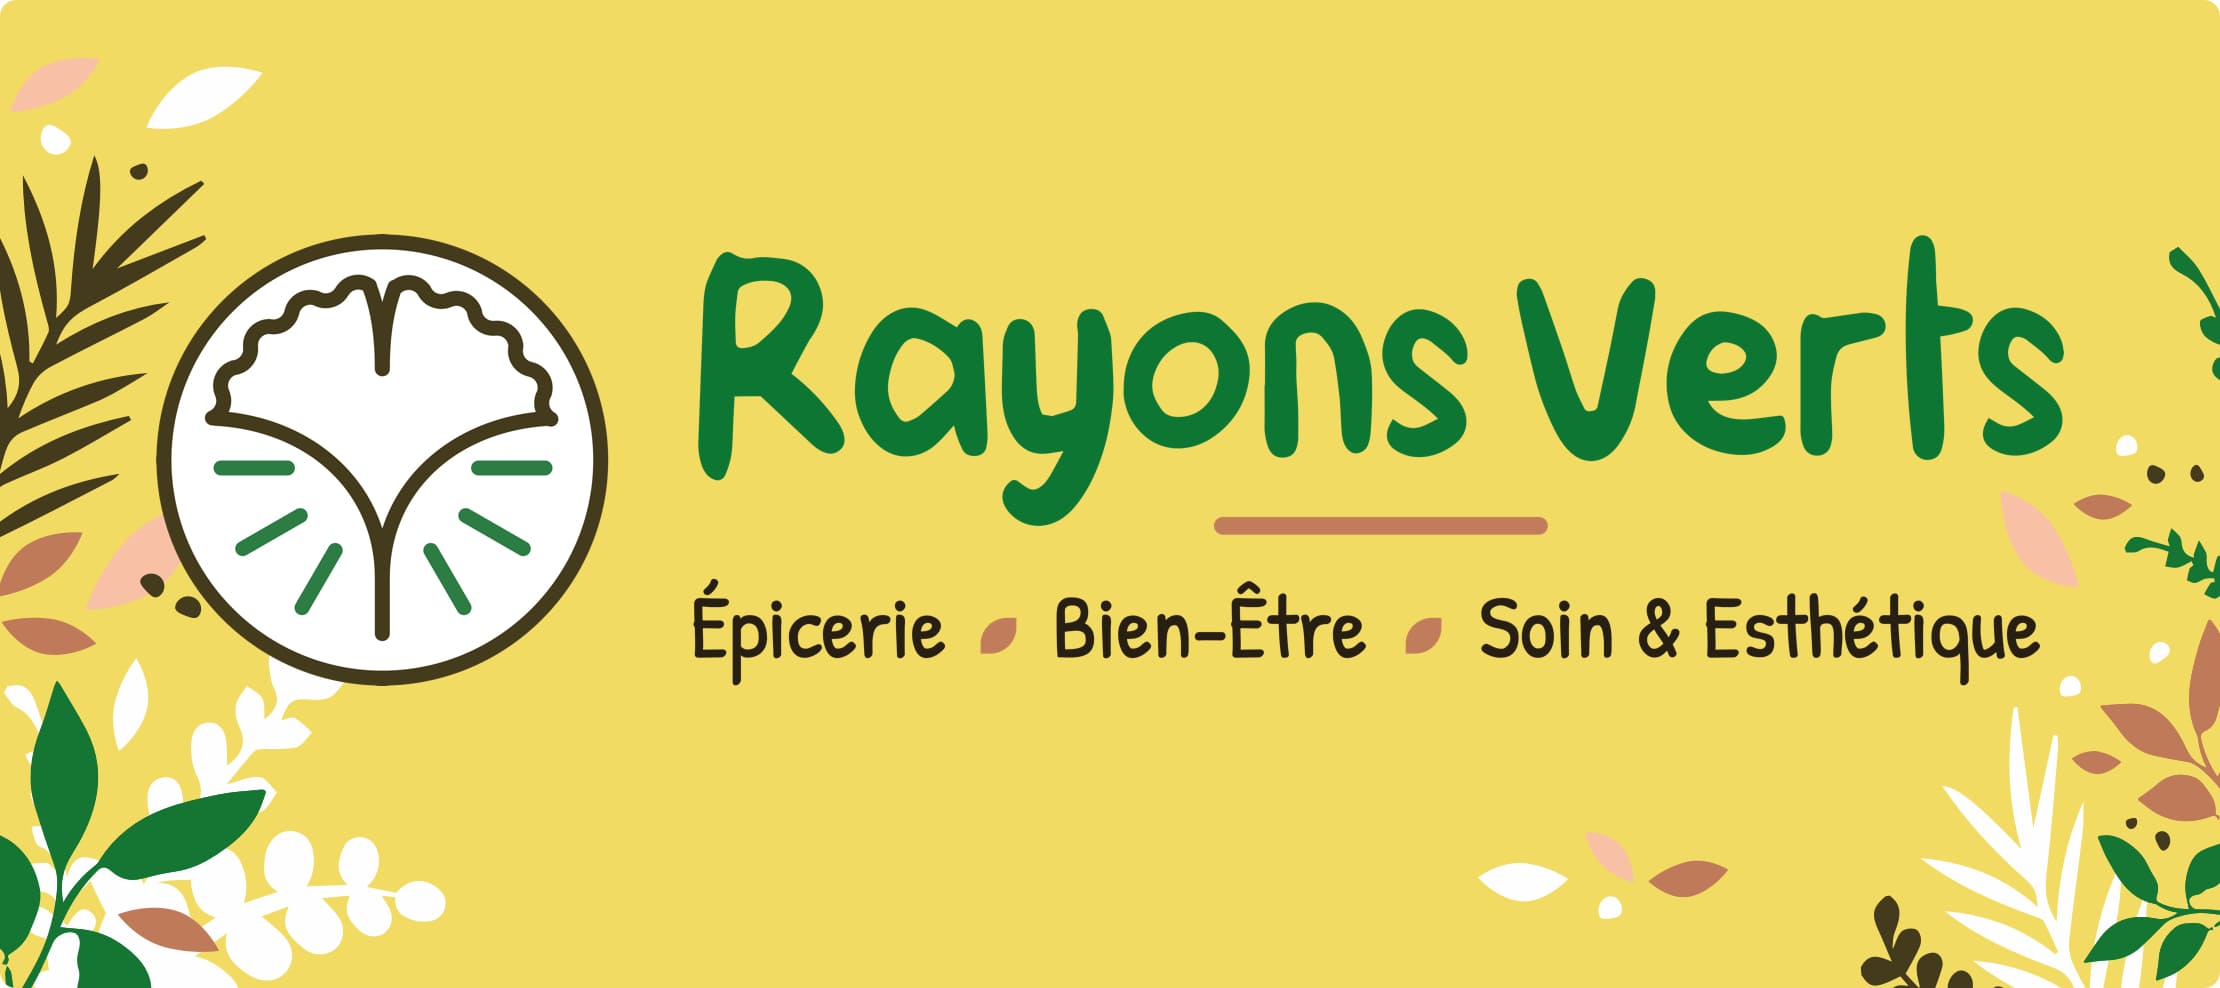 Rayons Verts création affiche, graphitéine agence